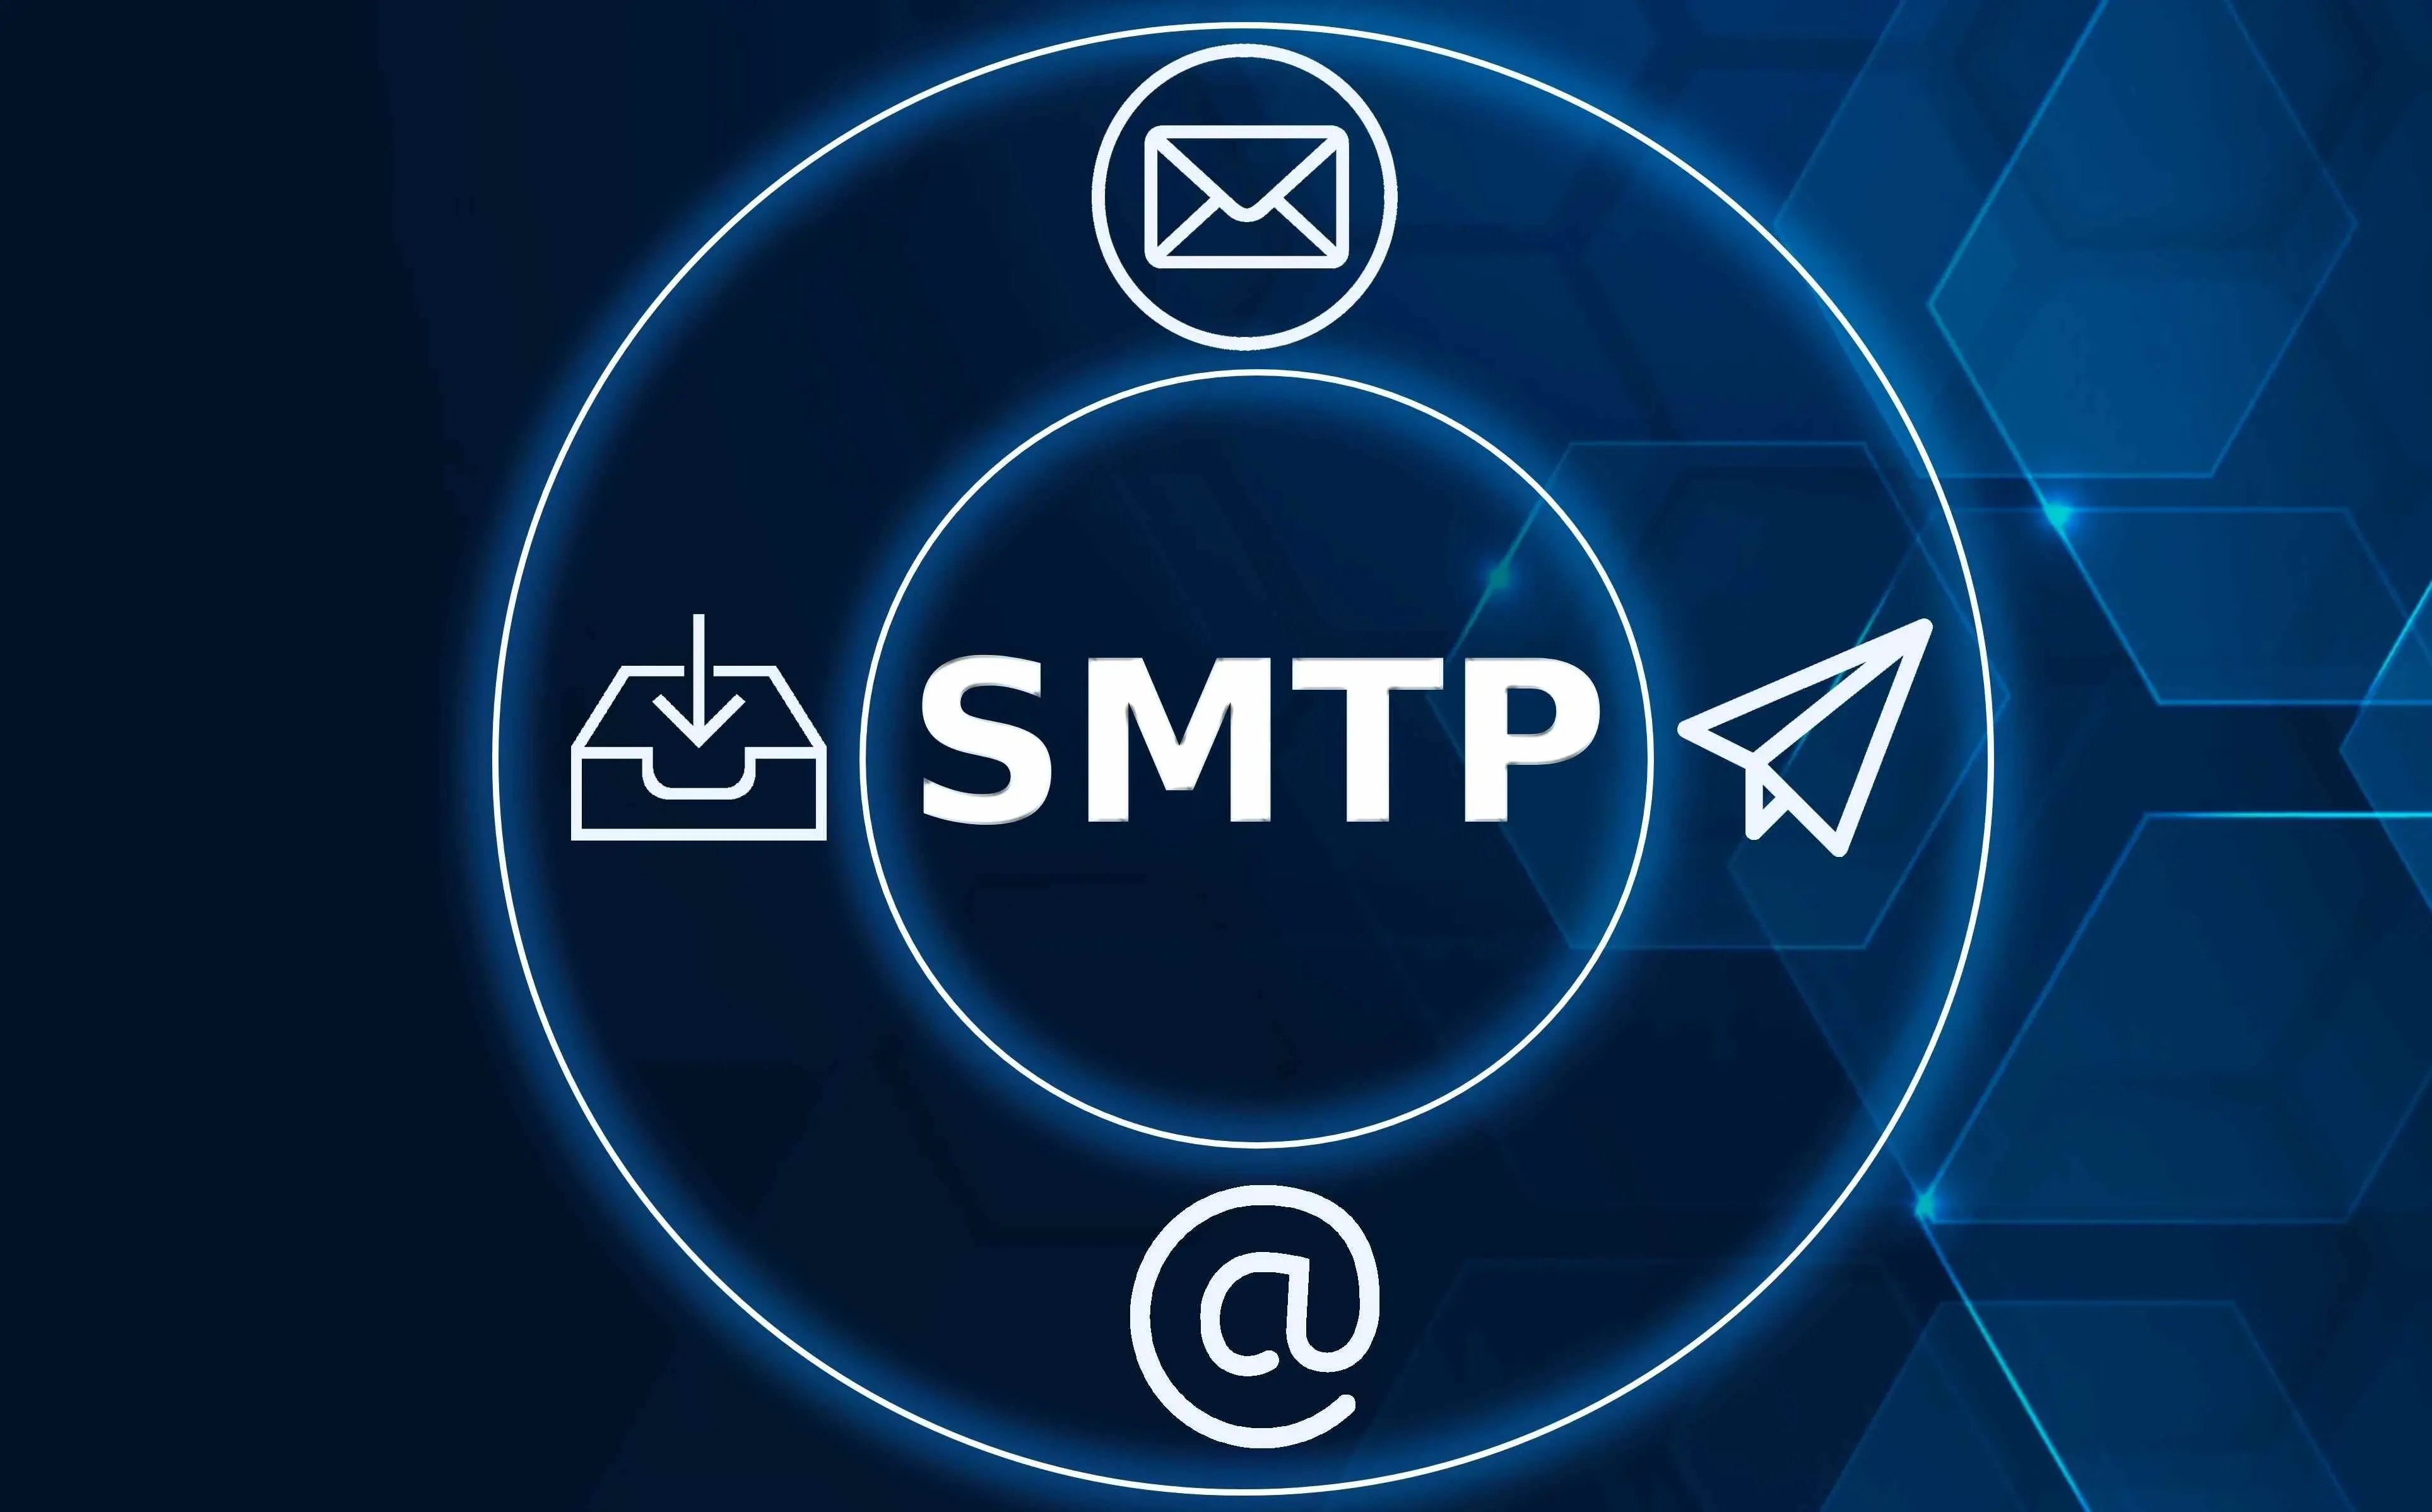 How to Choose the Right SMTP Port for Your Needs